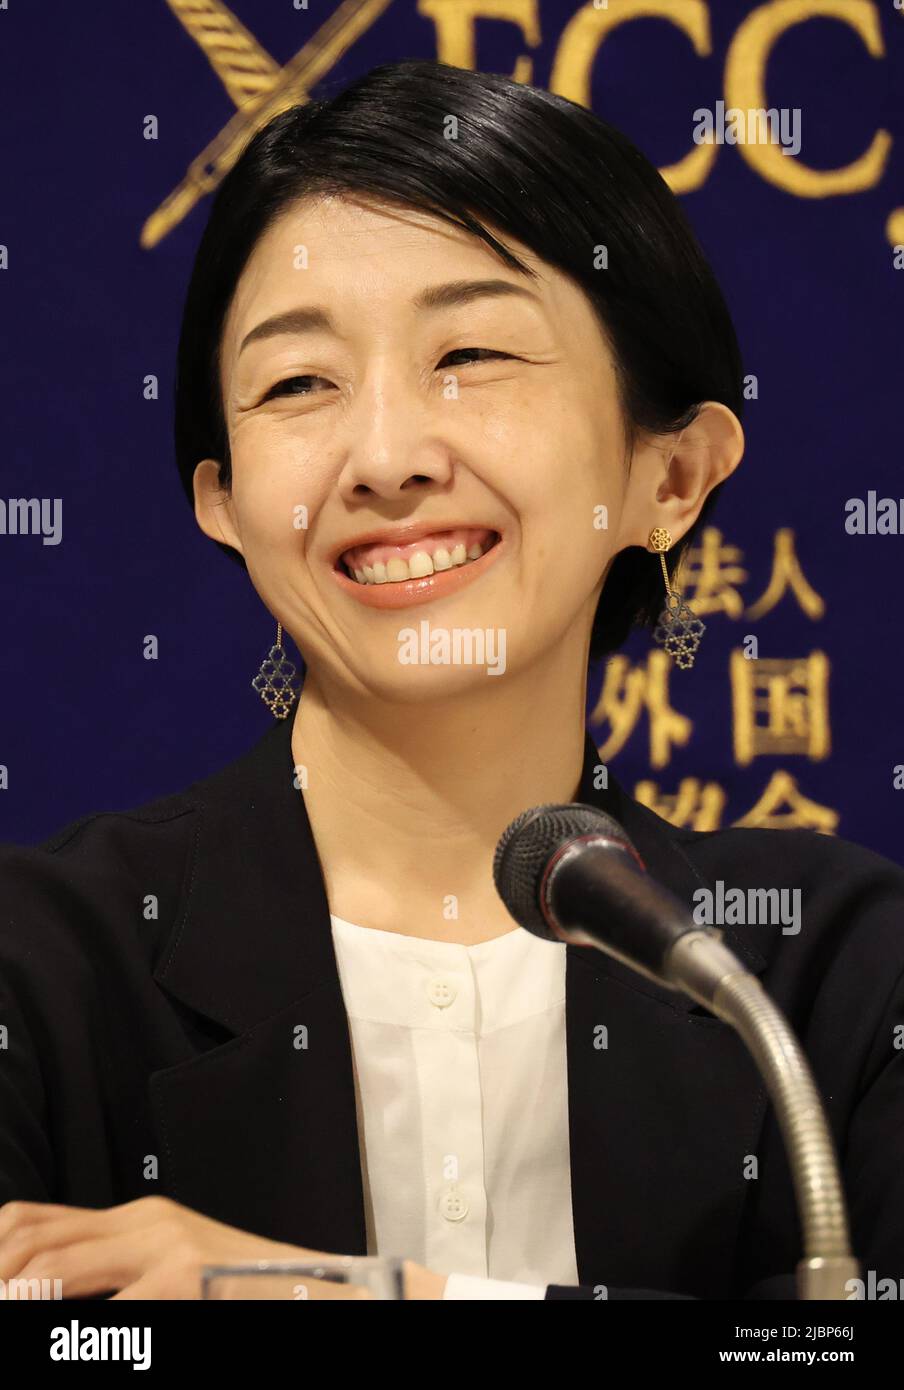 Tokyo, Japan. 7th June, 2022. Japanese film director Chie Hayakawa speaks at a press conference for her latest movie 'Plan 75' at the Foreign Correspondents' Club of Japan in Tokyo on Tuesday, June 7, 2022. Hayakawa received a special mention by the jury of the Camera d'Or award for the debut film at the Cannes Film Festival last month. Credit: Yoshio Tsunoda/AFLO/Alamy Live News Stock Photo